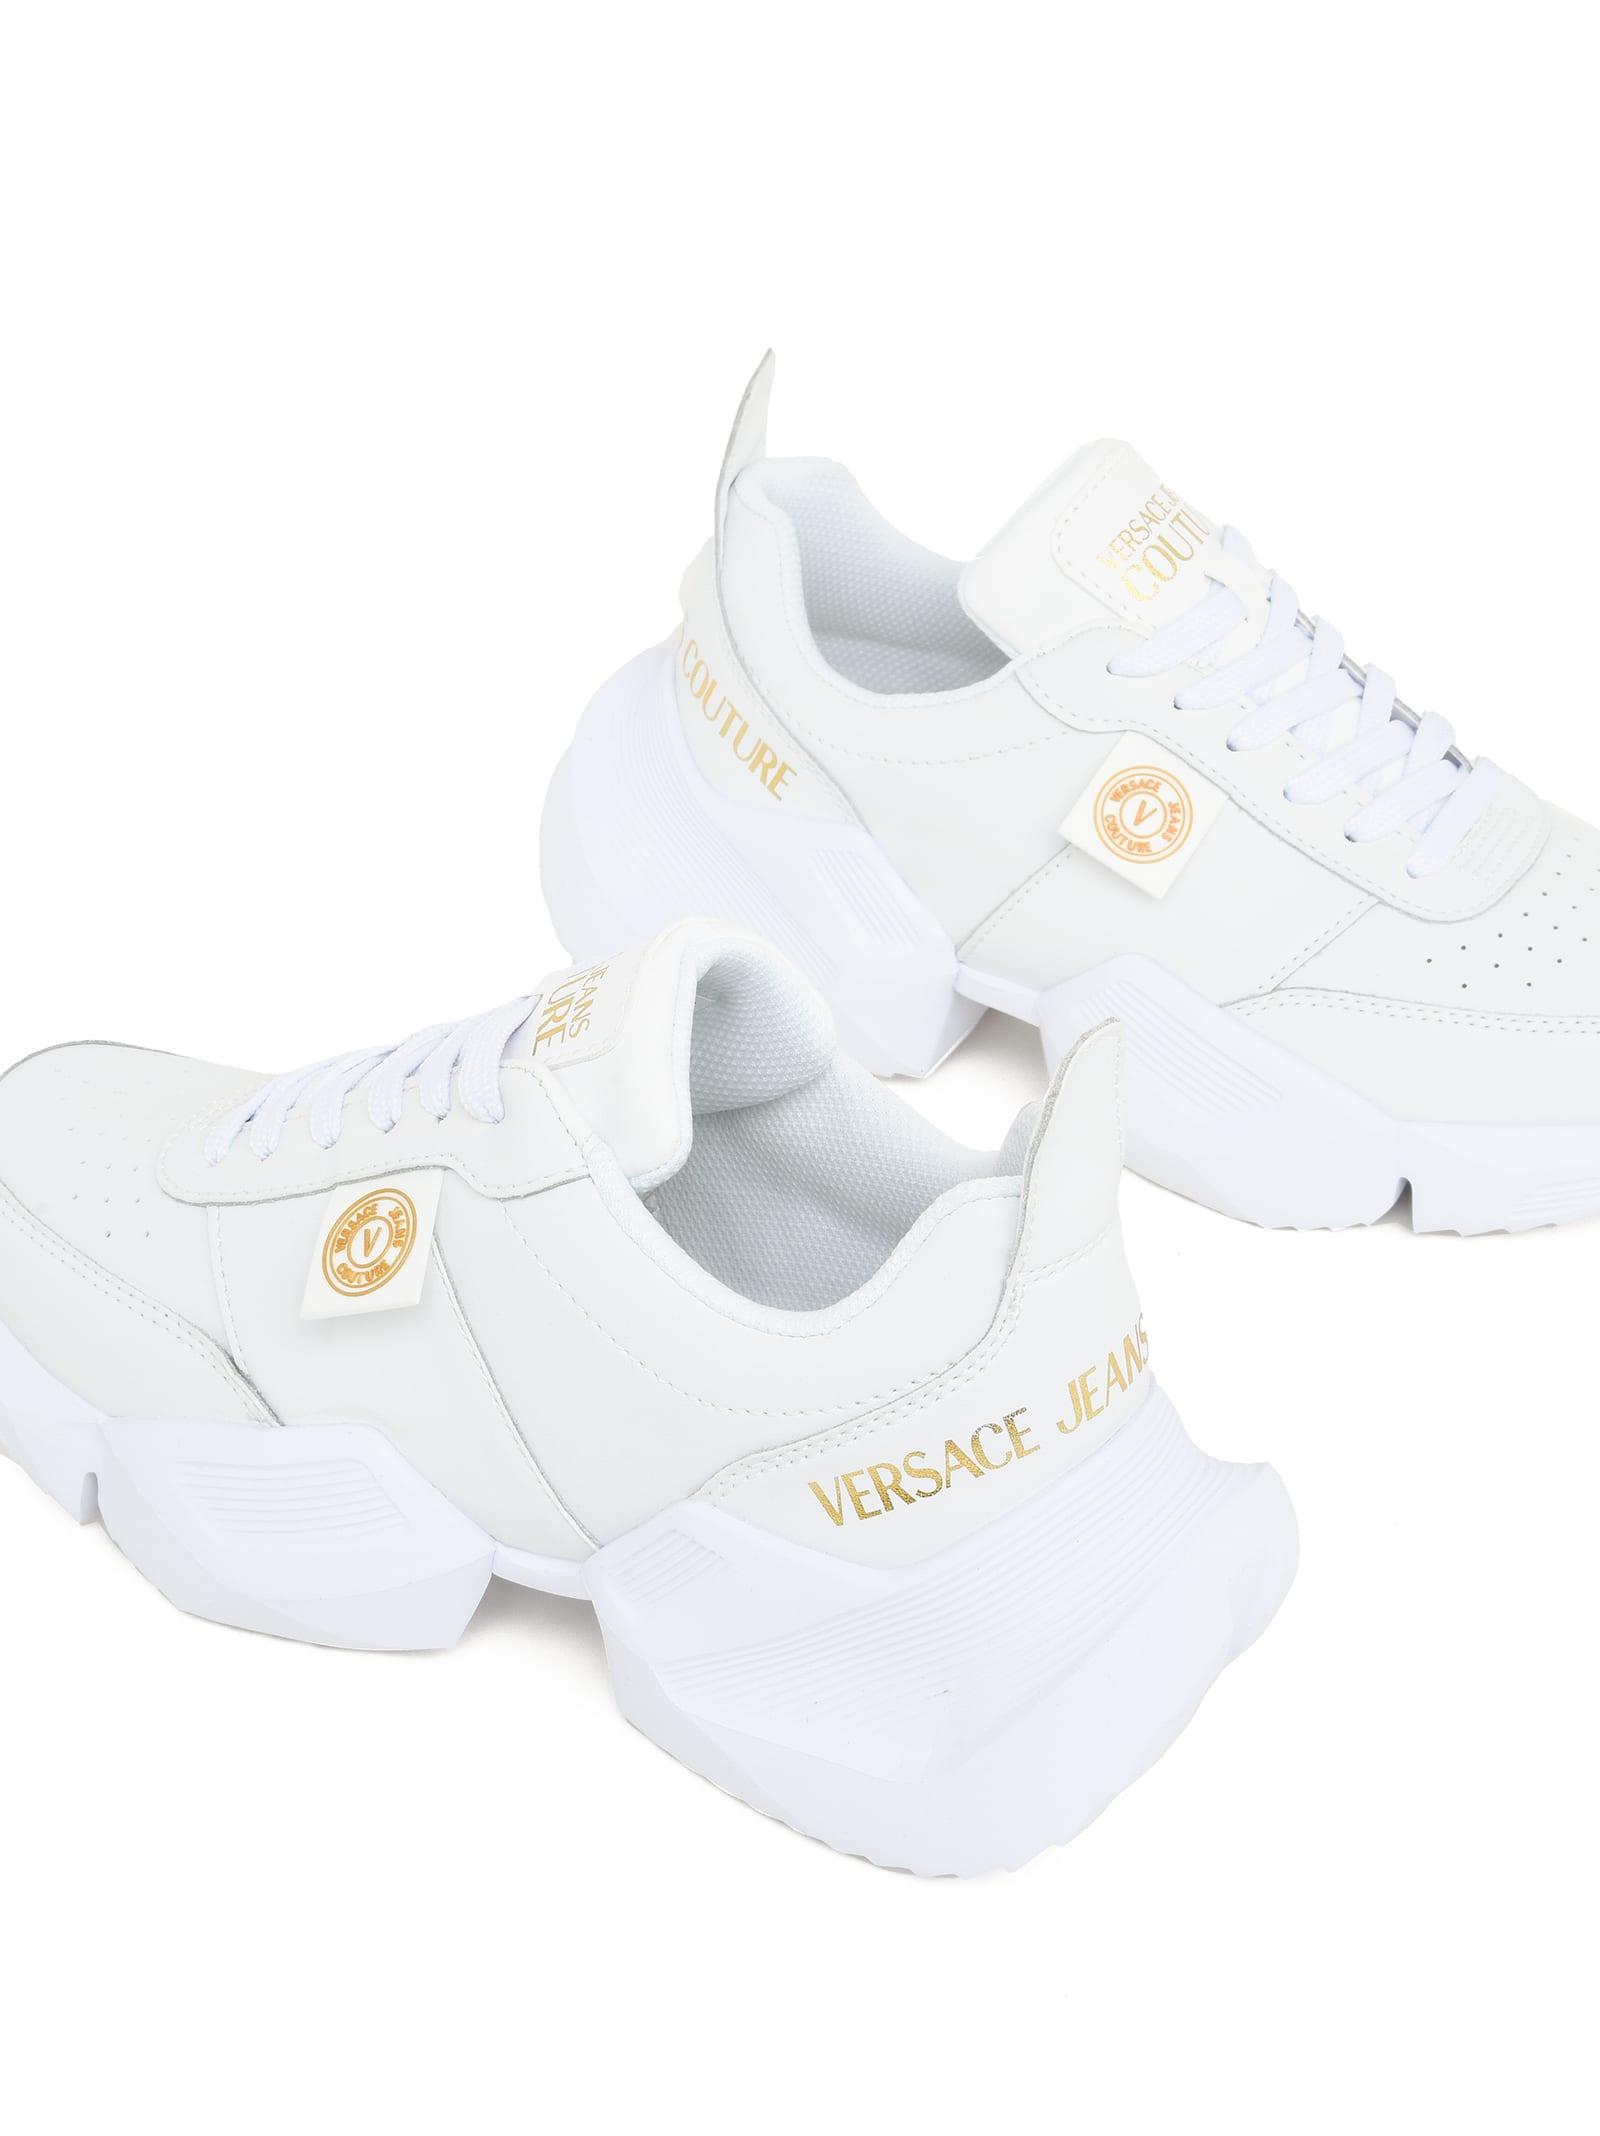 Versace Jeans Couture Leather Running Sneakers With Oversized Outsole in  White | Lyst